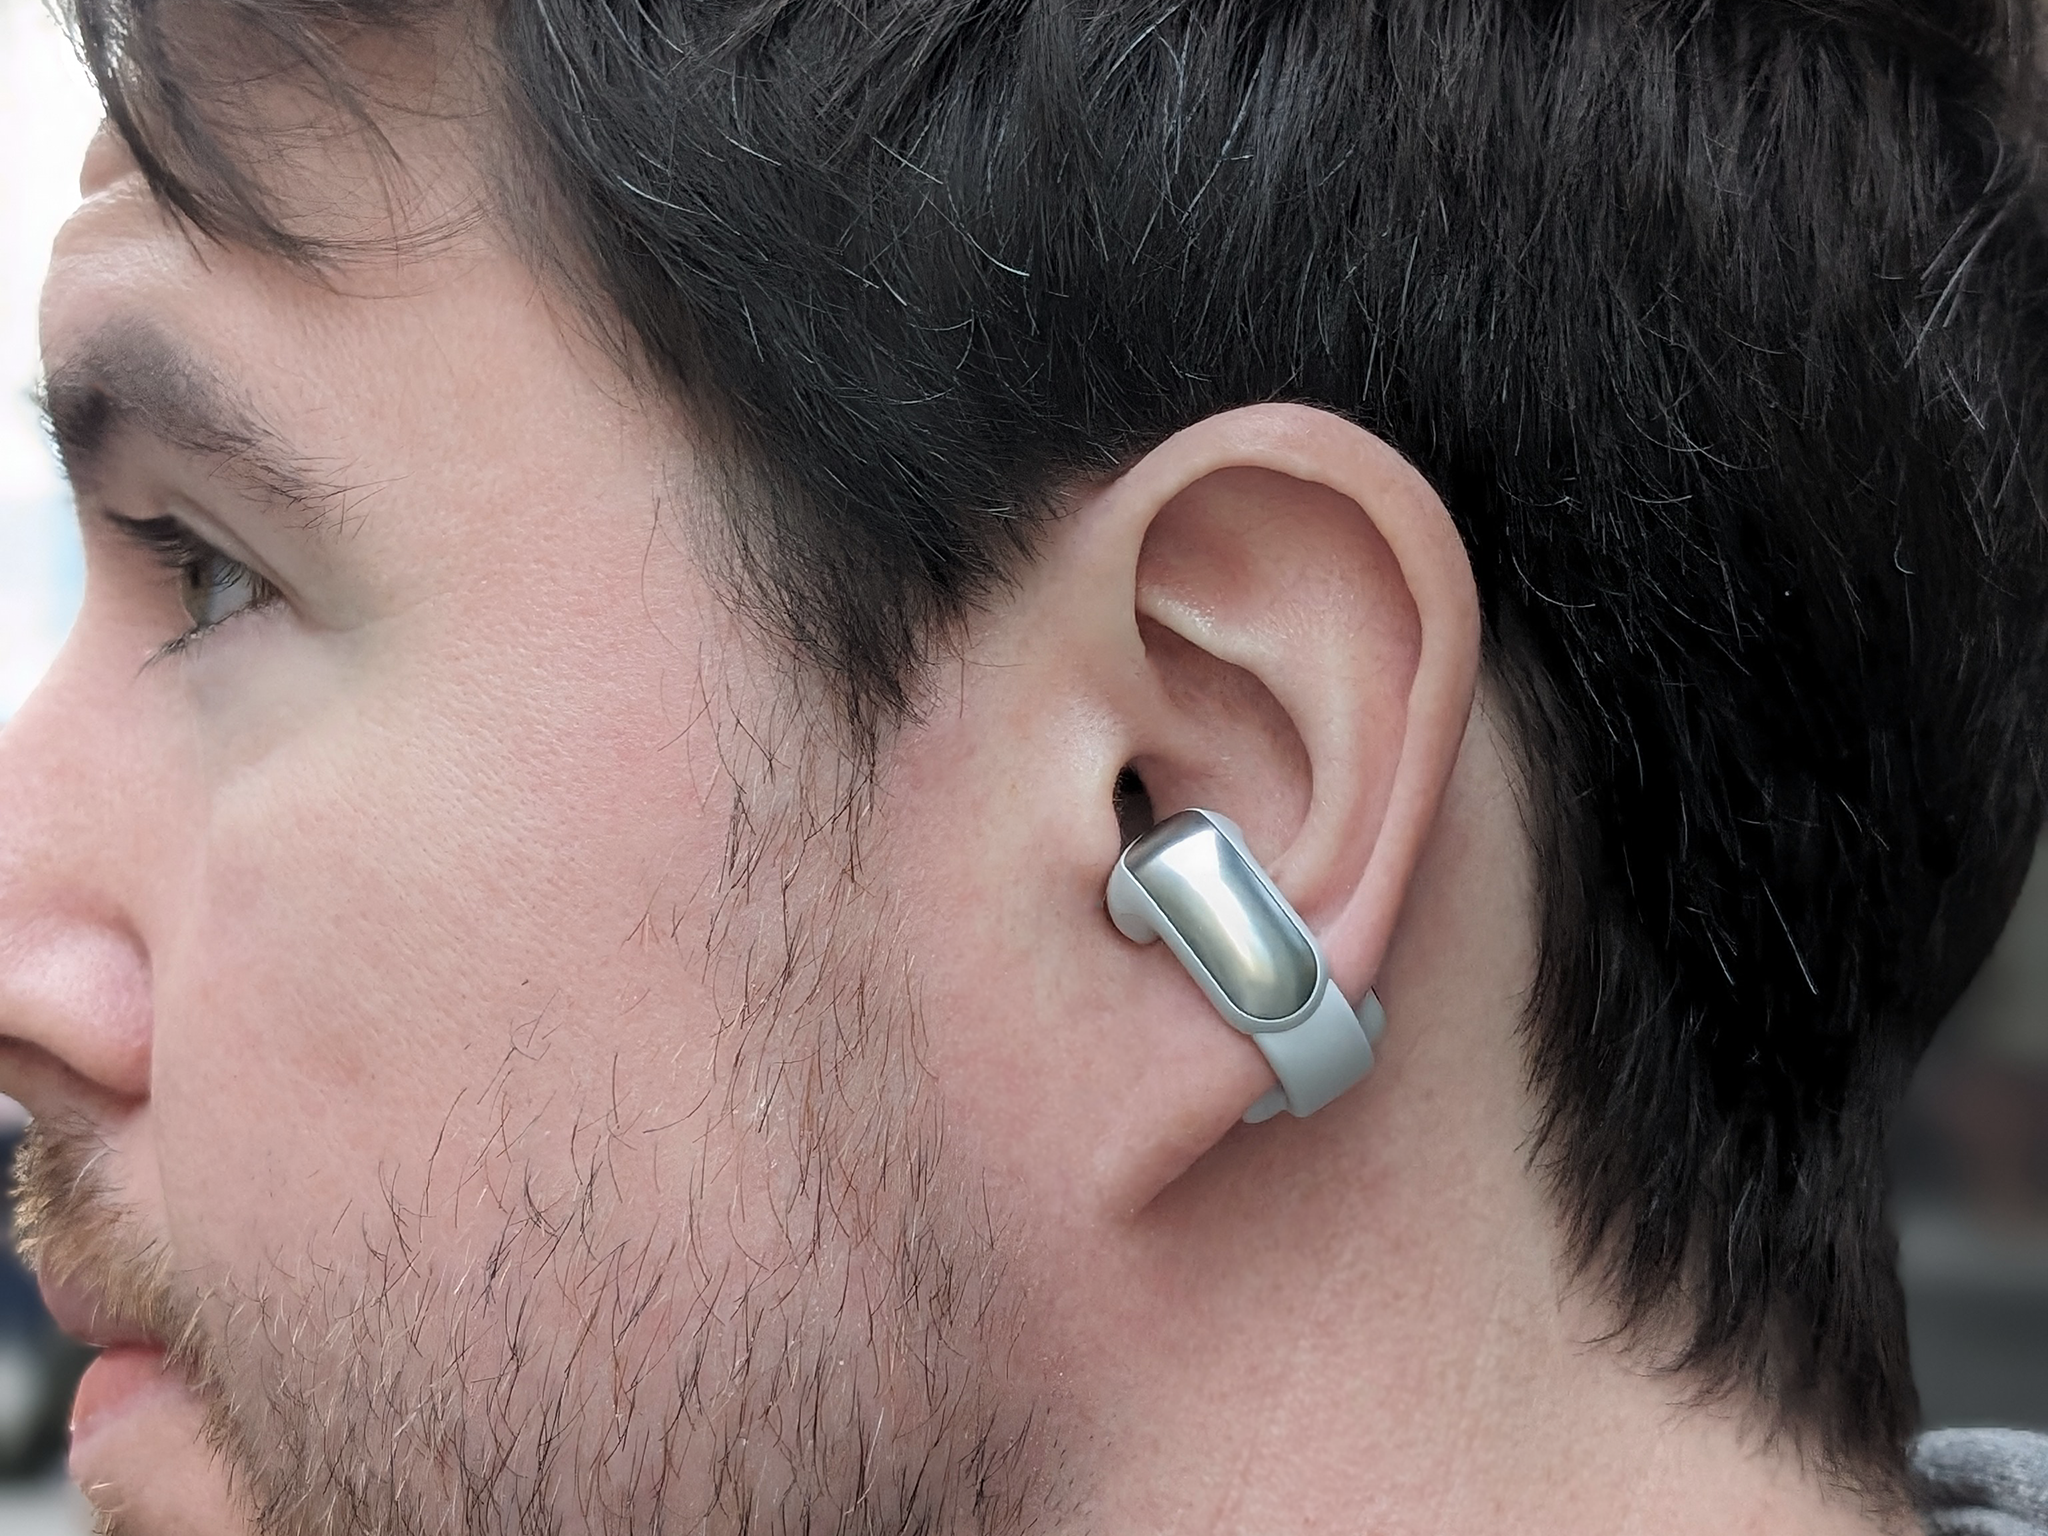 We tried the earbuds for a number of weeks